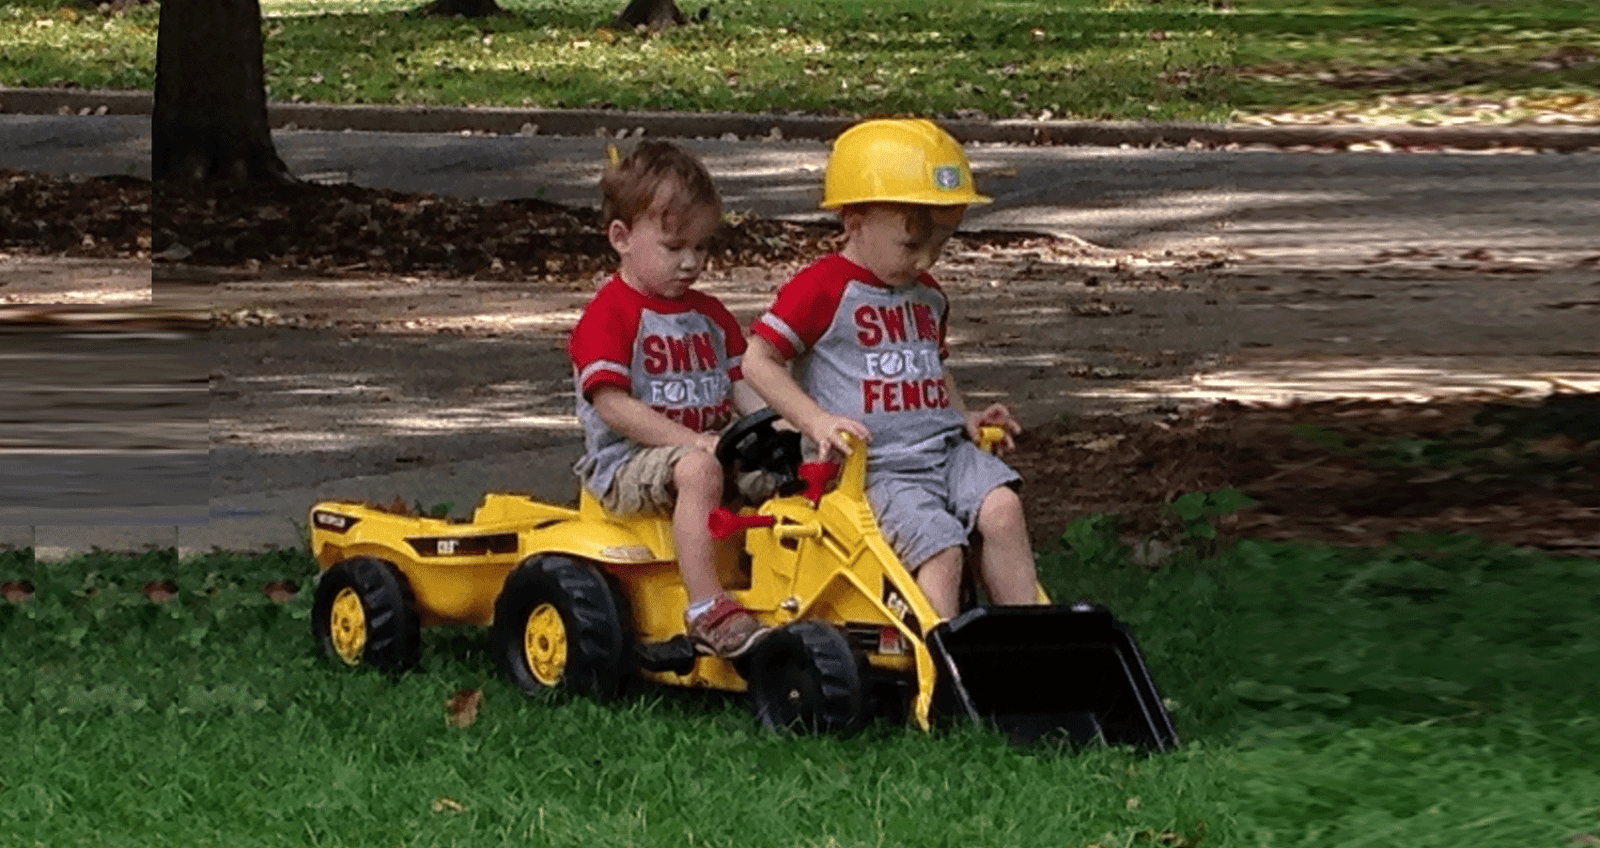 two young children riding on yellow cat tractor toy in green grass next to pavement